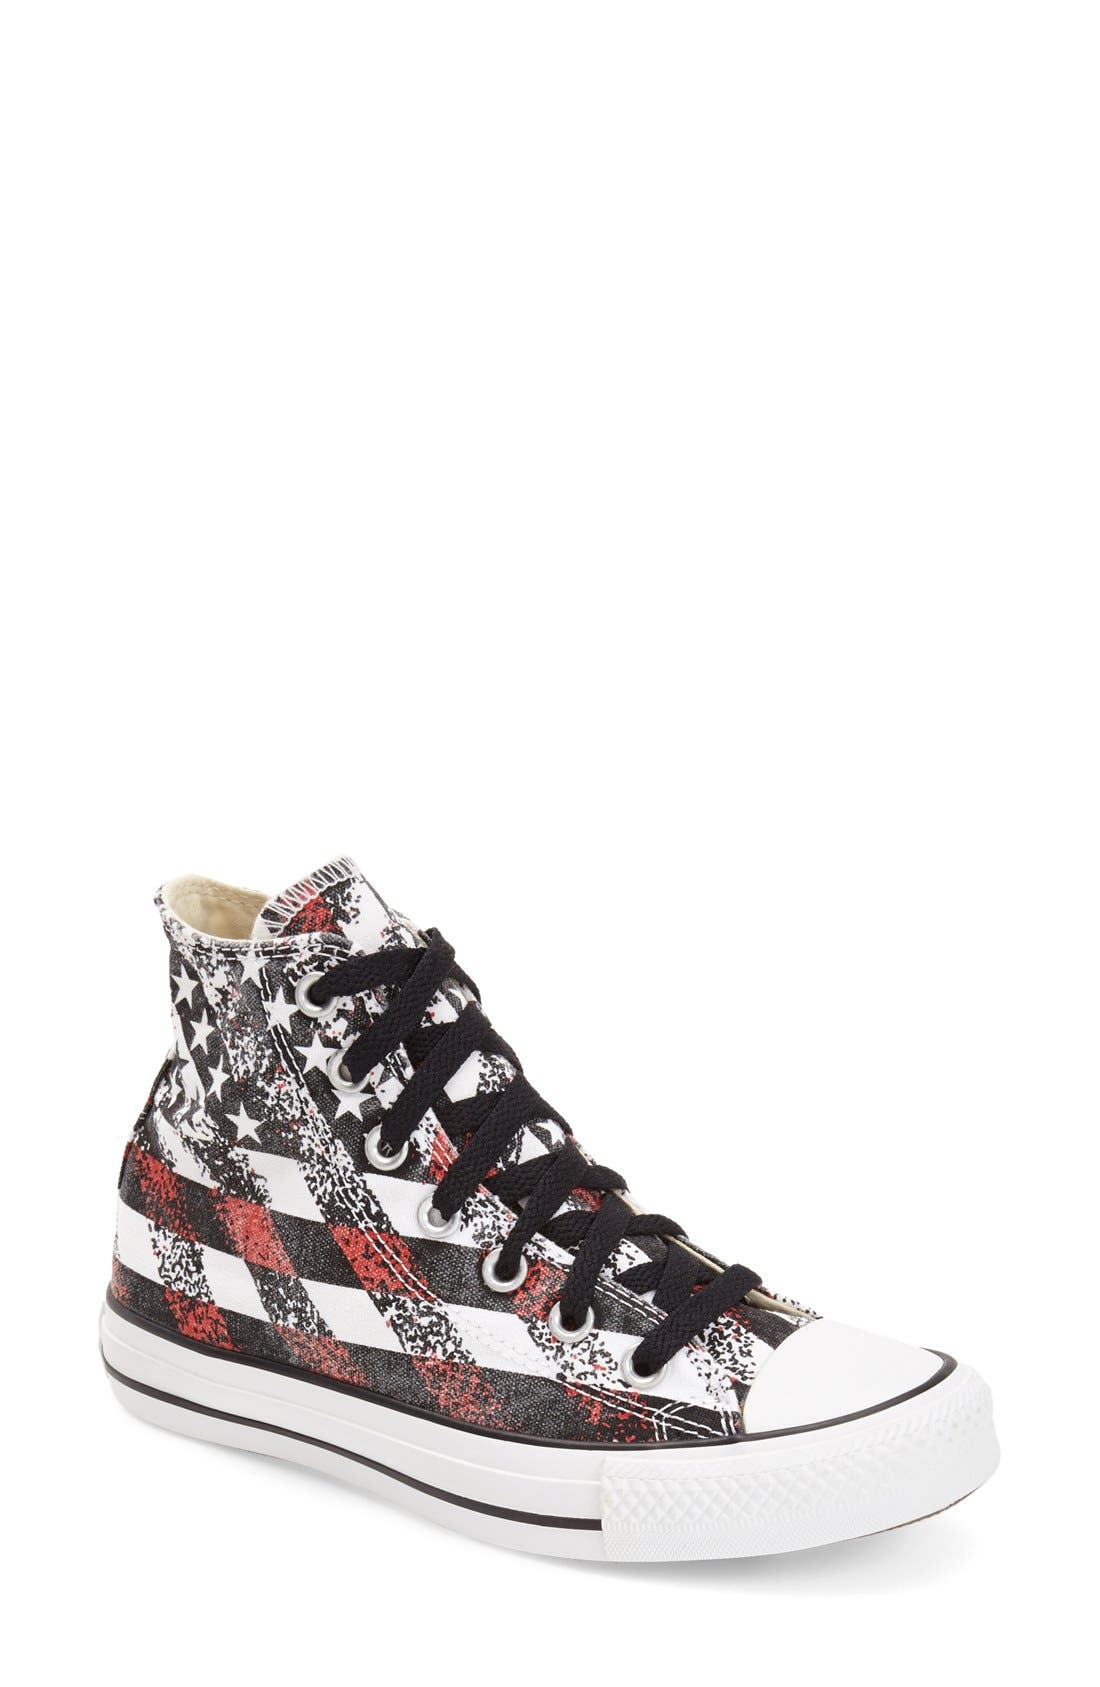 converse washed flag